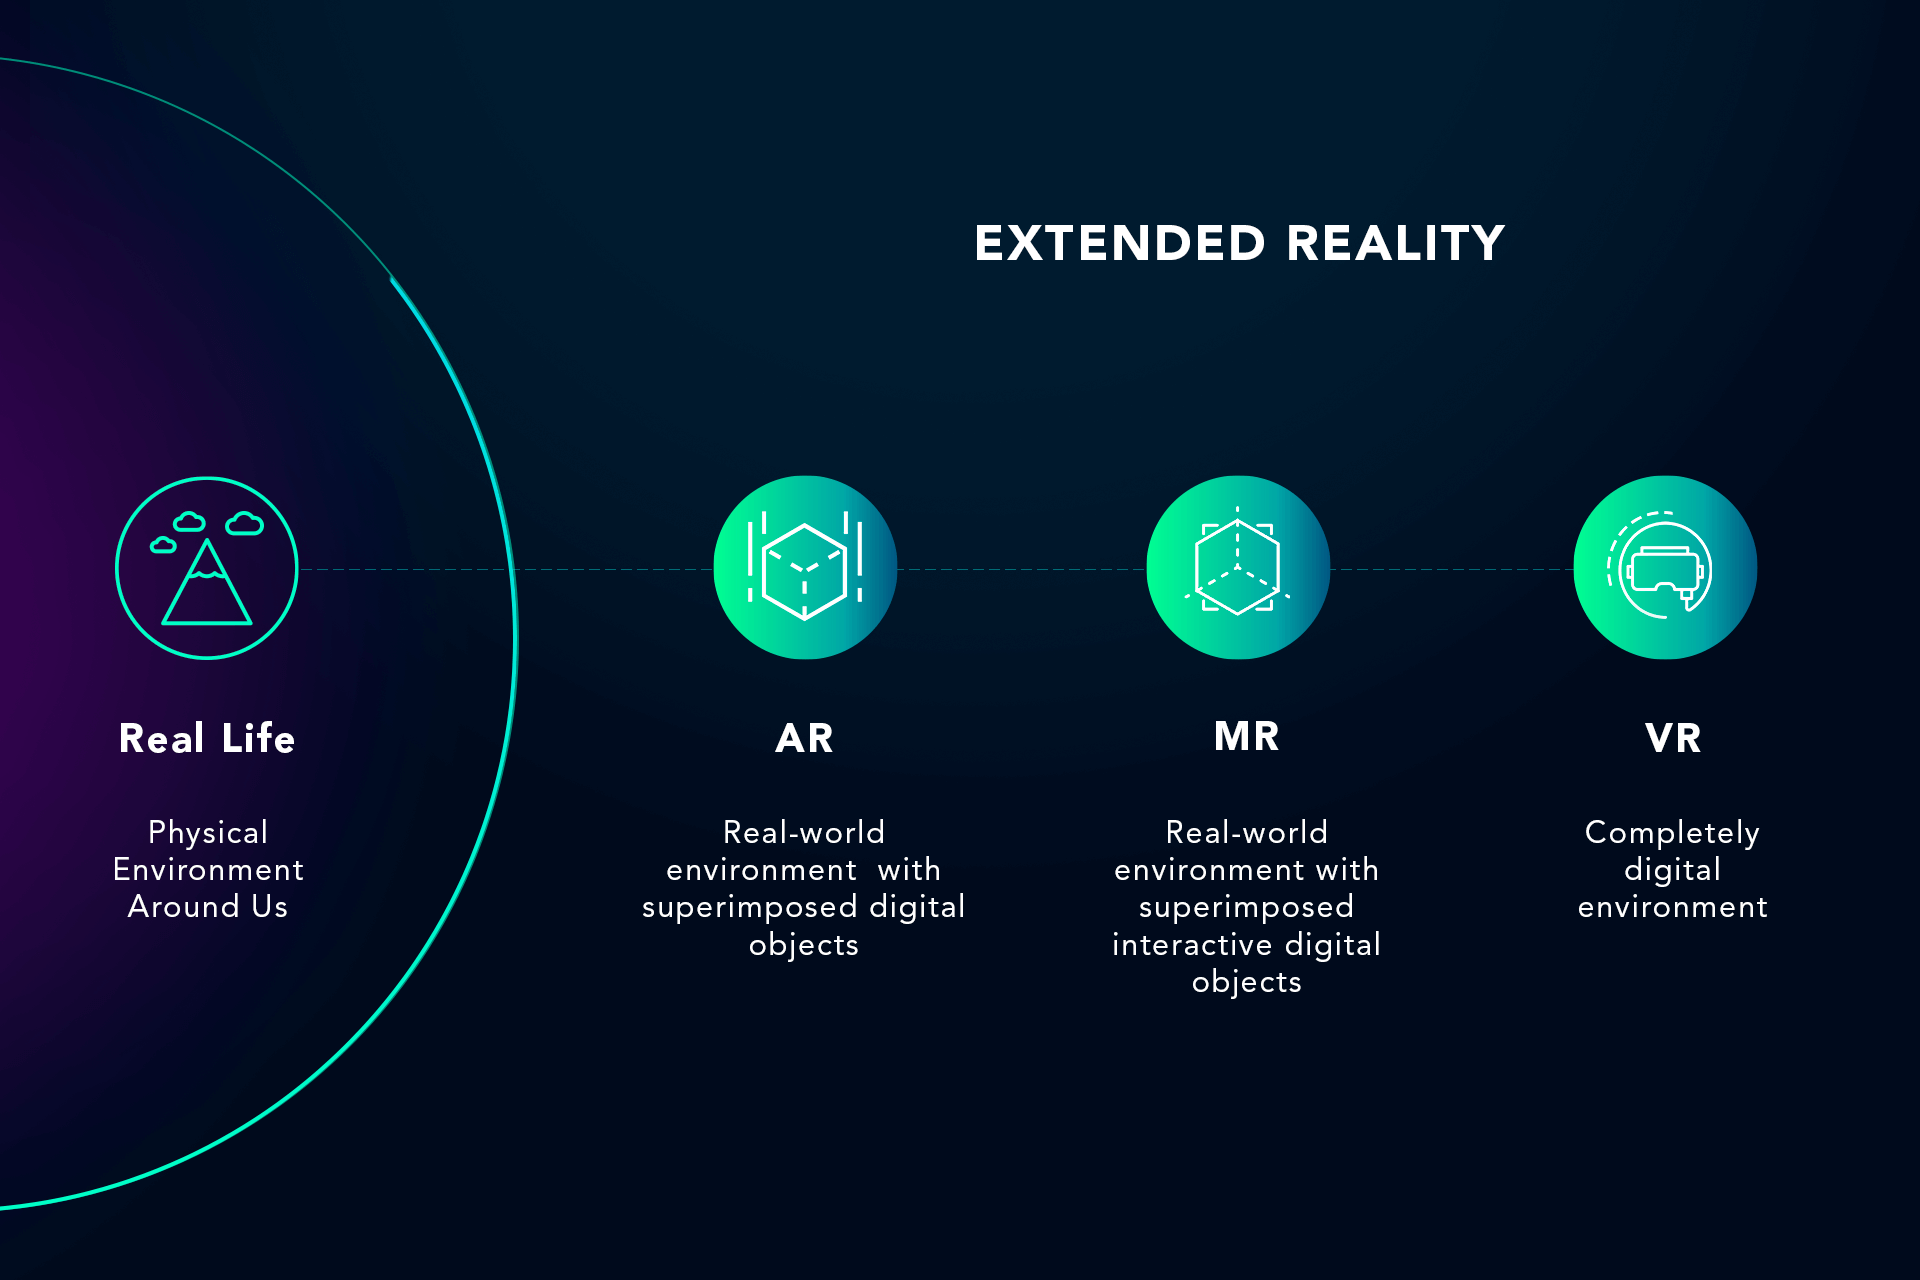 The Future of Community Media is Extended Reality | softengi.com